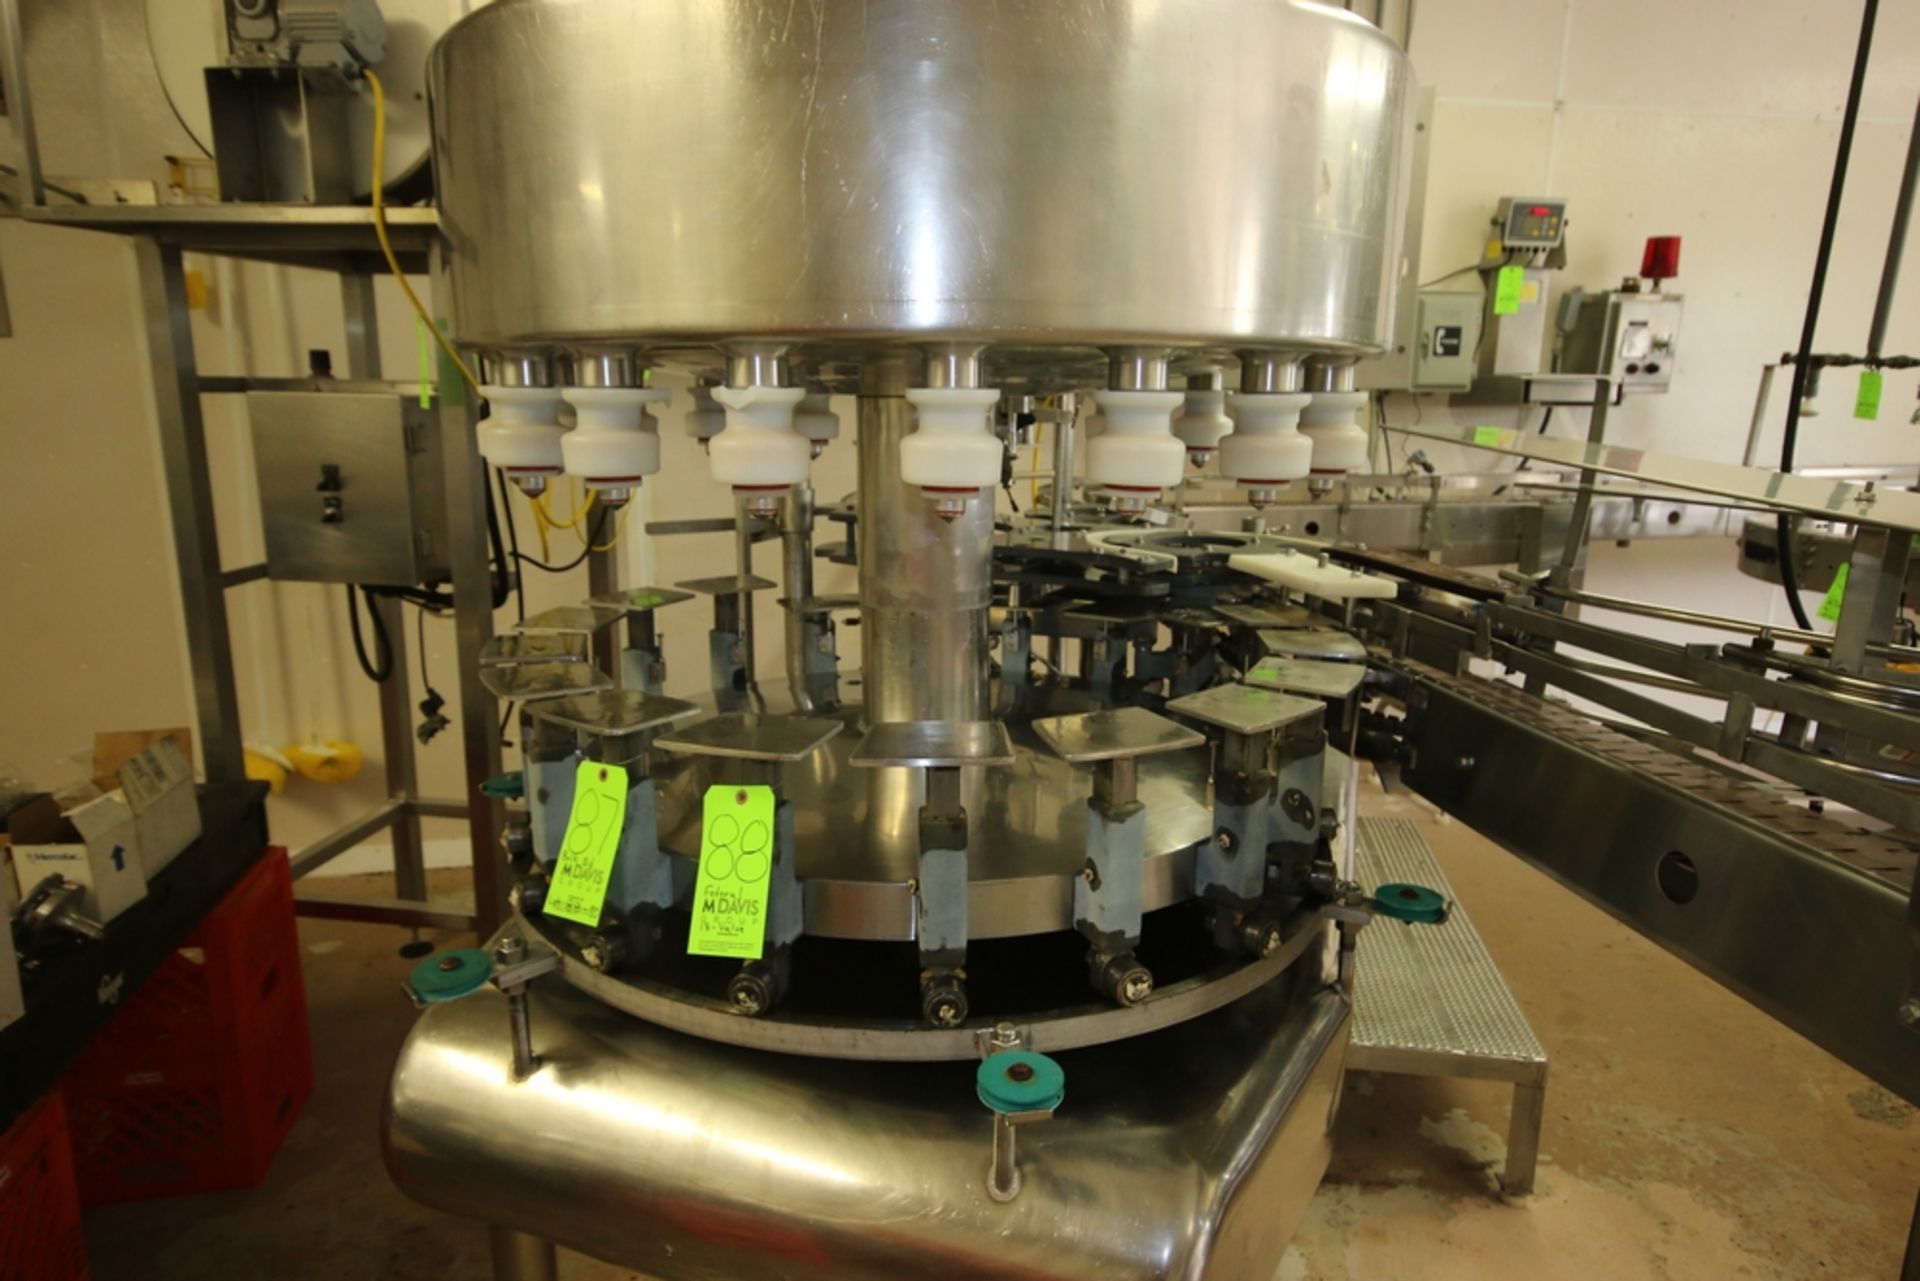 Federal 18-Valve Rotary Filler, with 5-Station Rotary Capper, with Stand Alone Capping Feed - Image 7 of 22